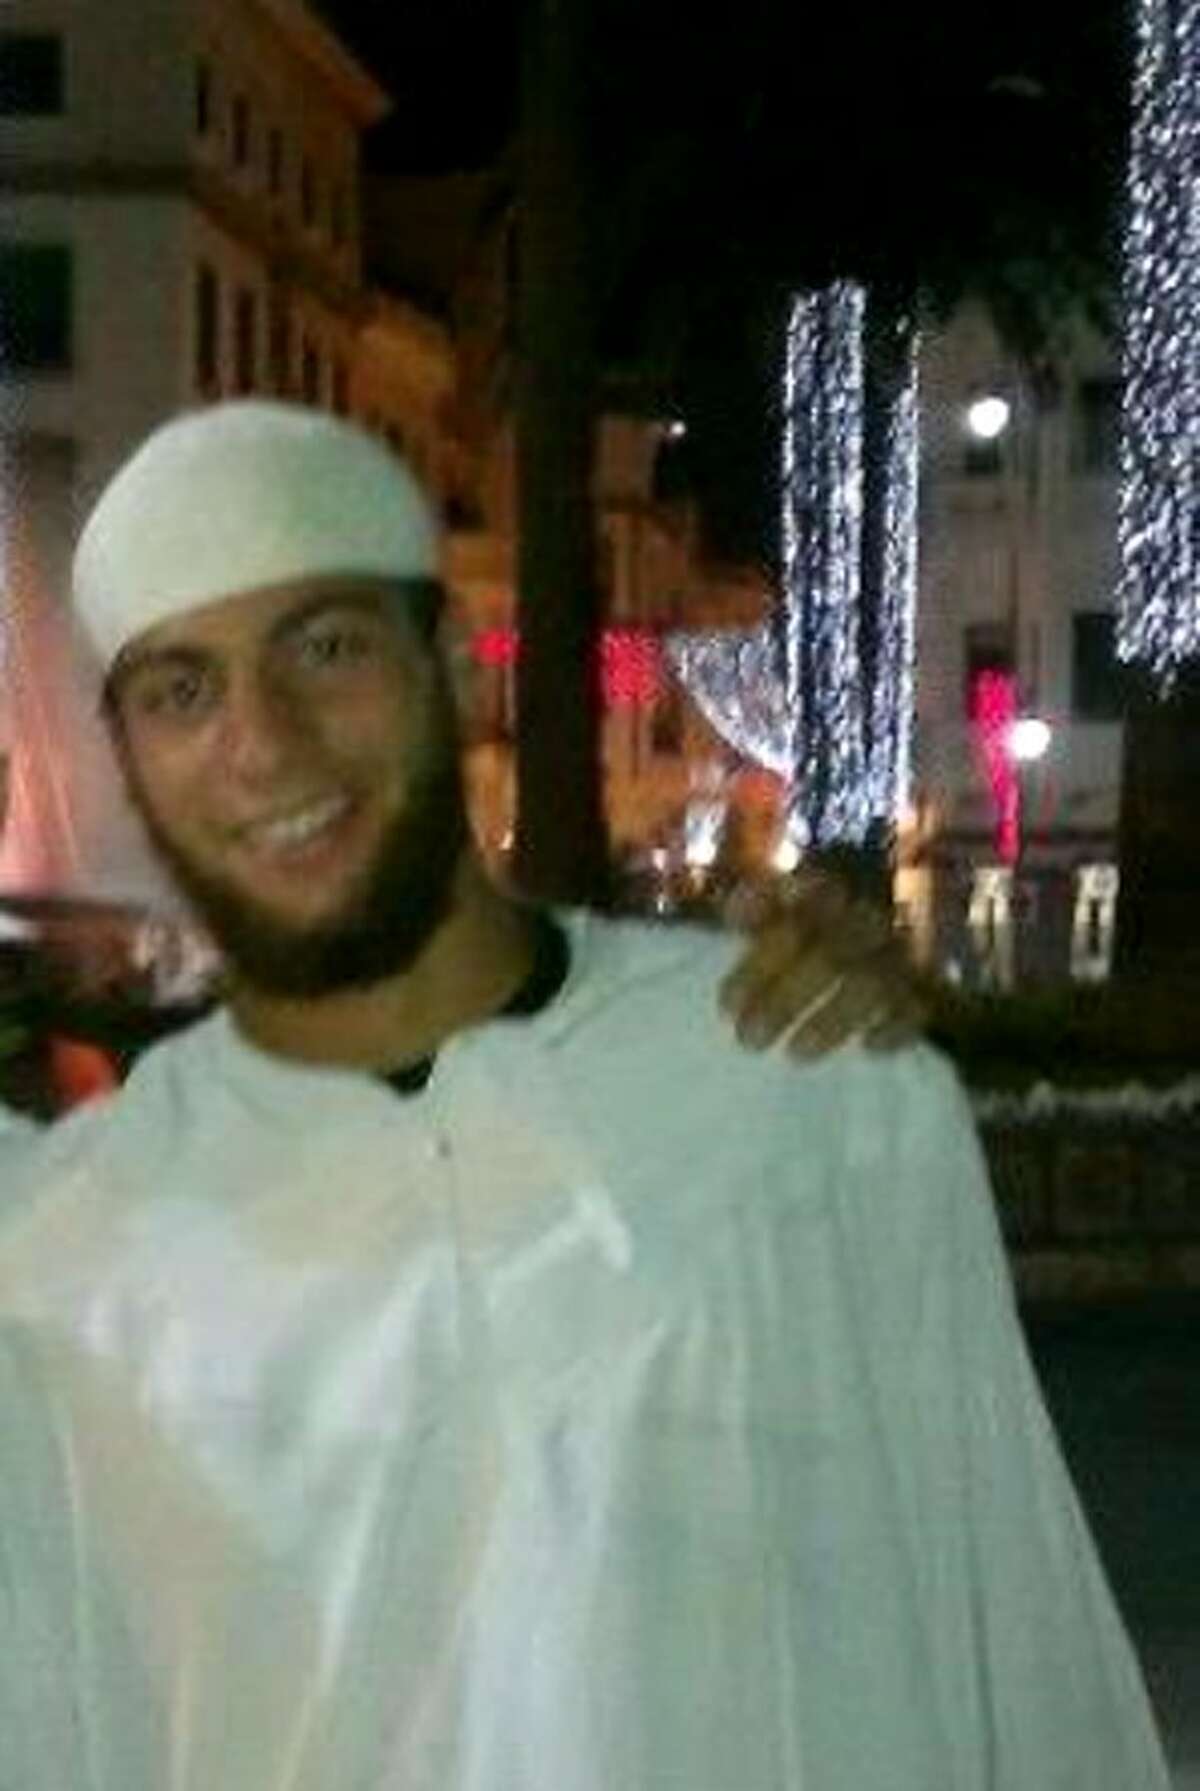 An undated photo released by a social network shows the 25-year-old Moroccan suspect in Friday's shooting, named as Ayoub El-Khazzani, who was overpowered by two US servicemen and other passengers before he could kill anyone during an attack aboard an Amsterdam-Paris Thalys train on August 21, 2015. He lived in (southern) Spain in Algeciras for a year, until 2014, then he decided to move to France. Once in France he went to Syria, then returned to France, according to a Spanish anti-terror source. AFP PHOTO / SOCIAL NETWORK = RESTRICTED TO EDITORIAL USE - MANDATORY CREDIT "AFP PHOTO / SOCIAL NETWORK" - NO MARKETING NO ADVERTISING CAMPAIGNS - DISTRIBUTED AS A SERVICE TO CLIENTS =-/AFP/Getty Images